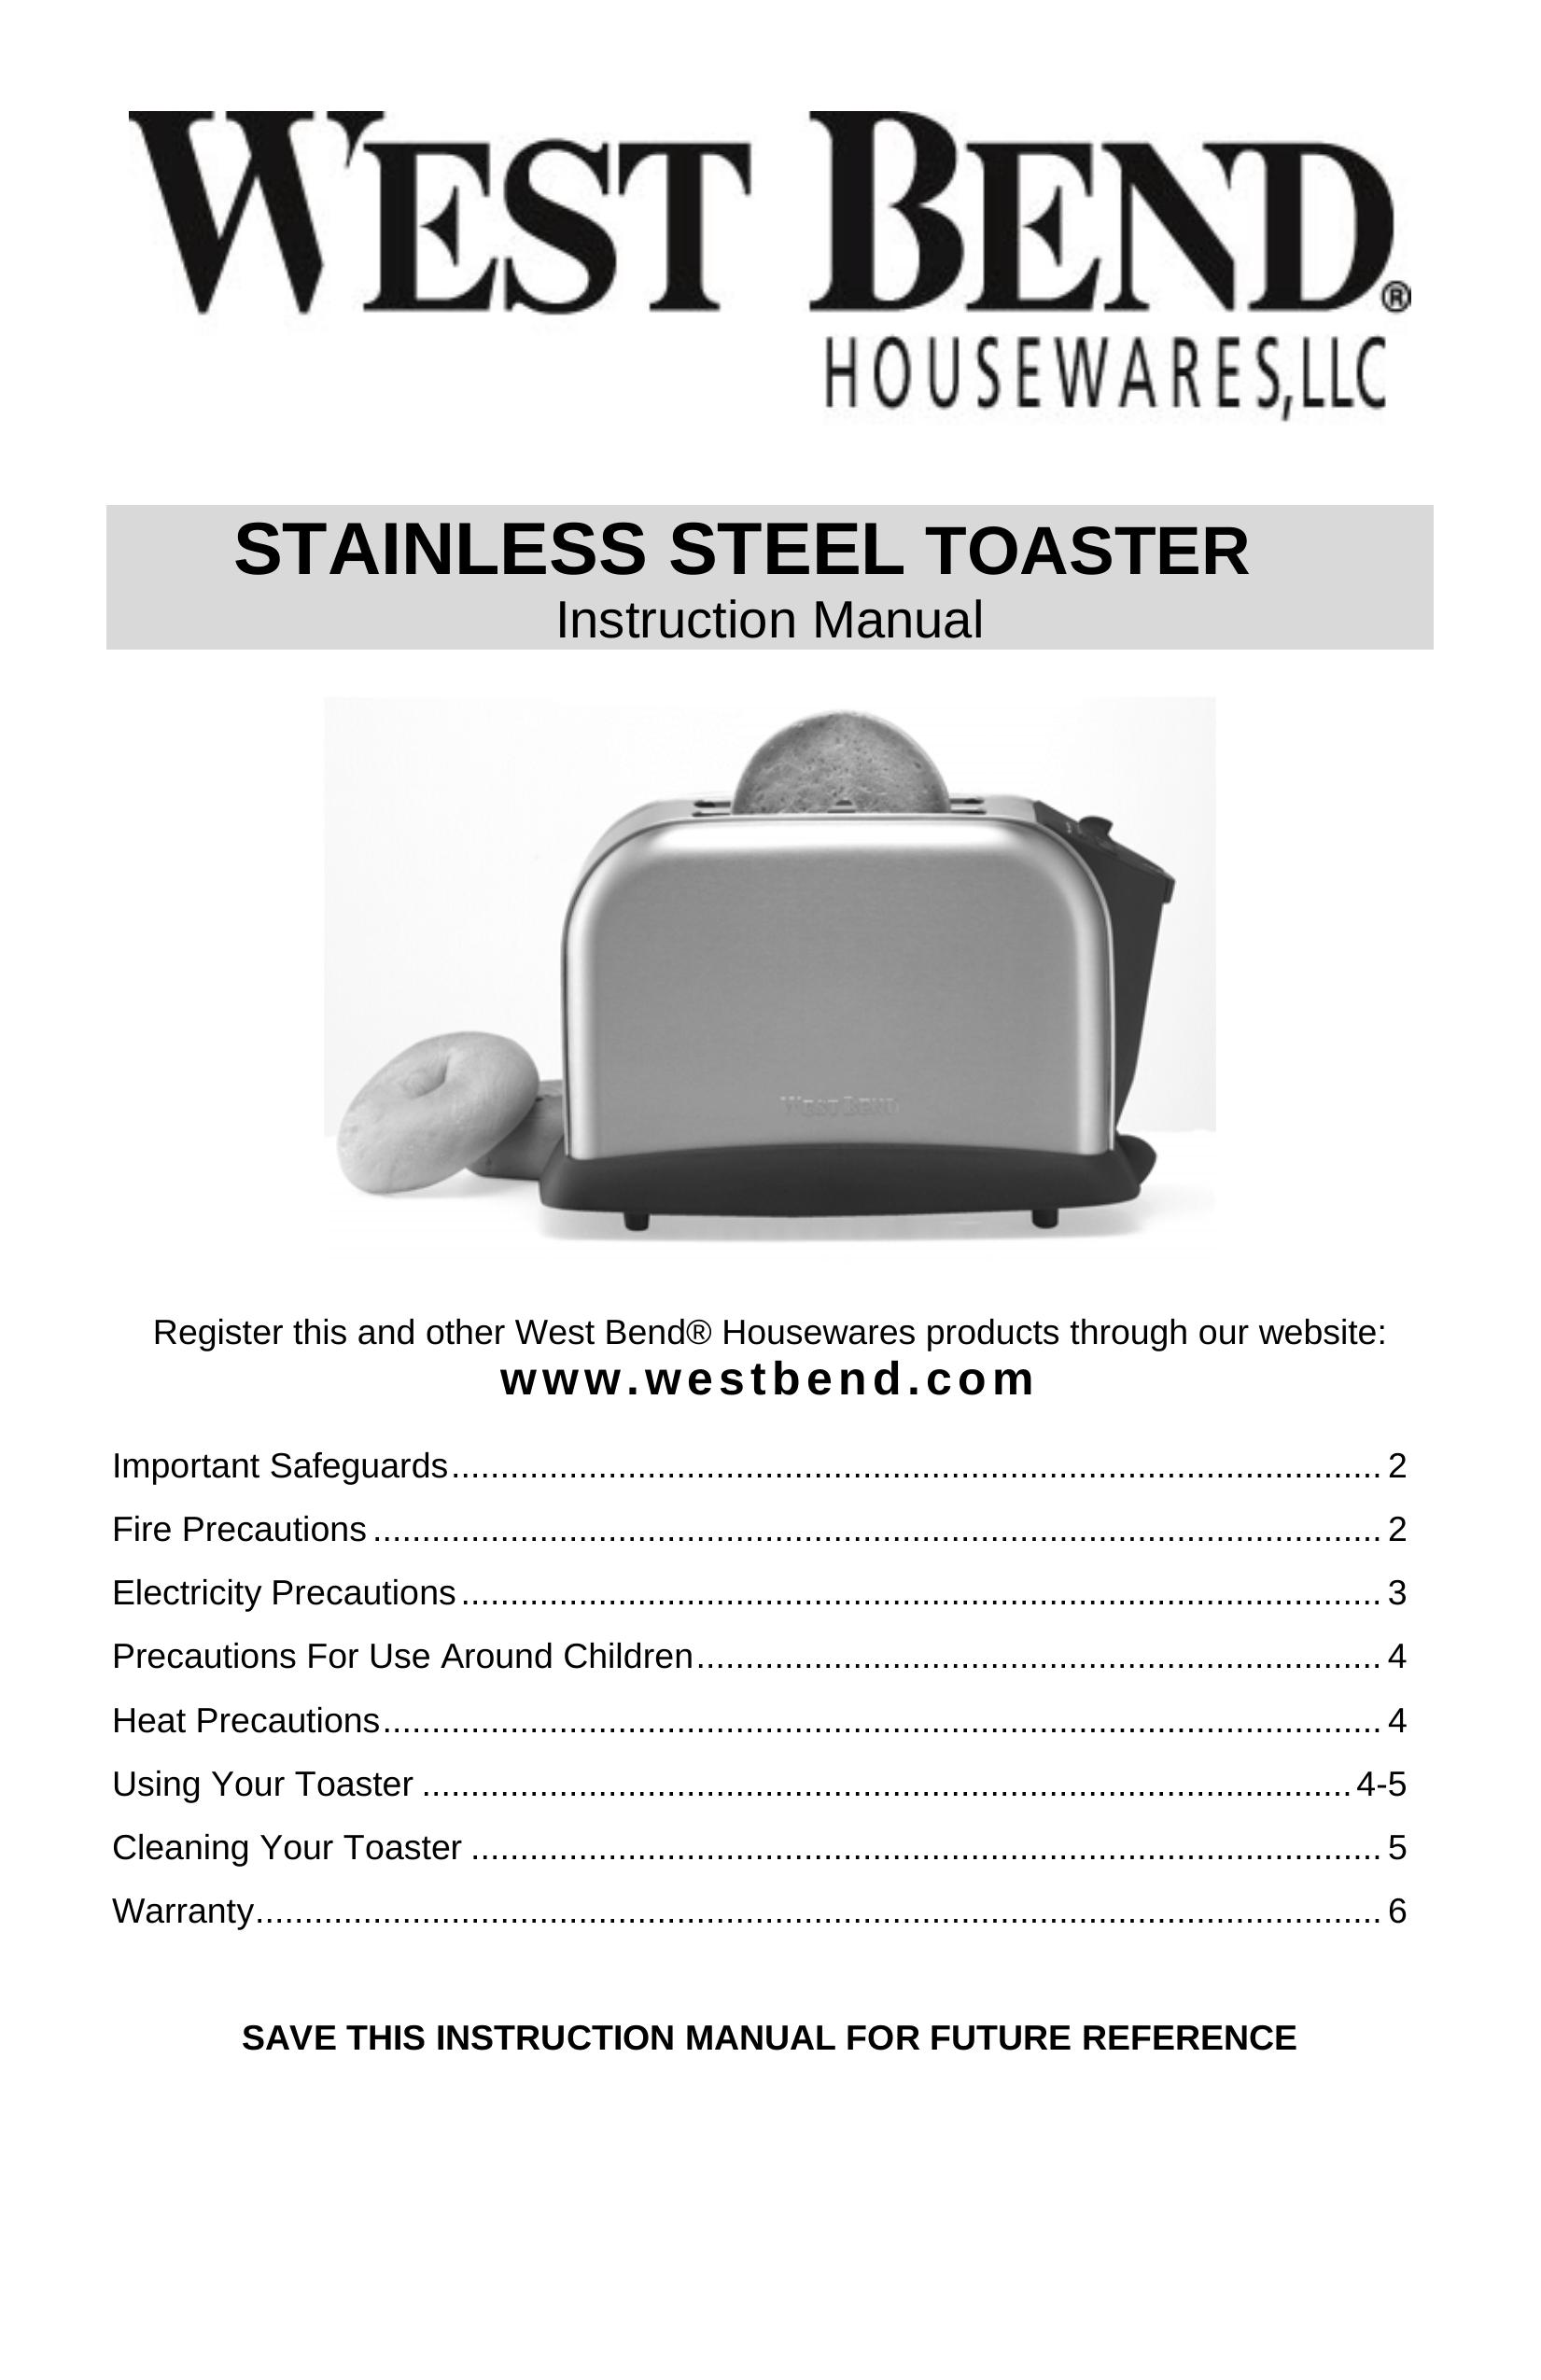 West Bend STAINLESS STEEL TOASTER Toaster User Manual